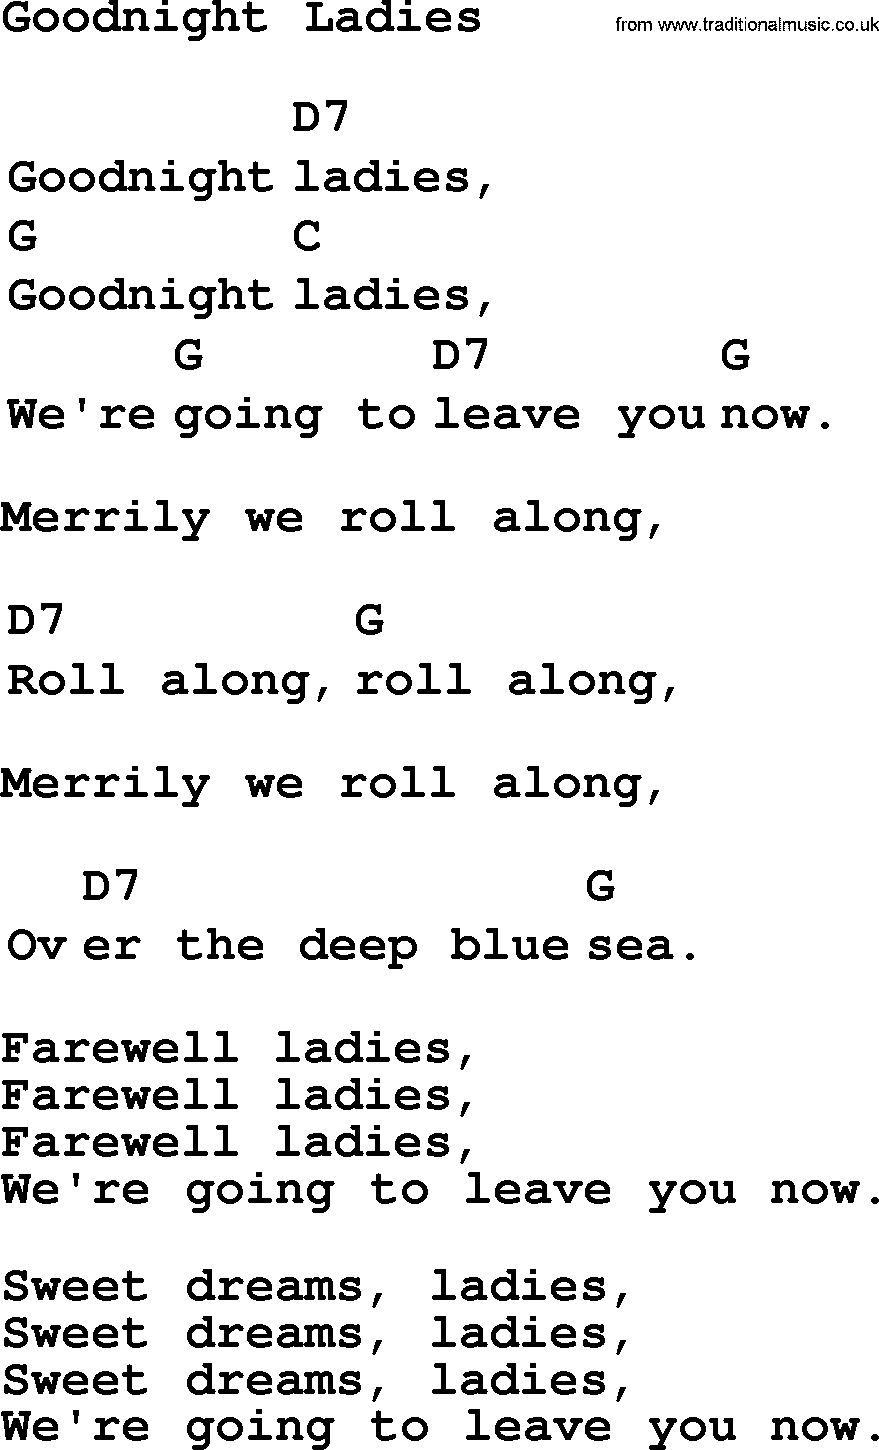 Top 1000 Most Popular Folk and Old-time Songs: Goodnight Ladies, lyrics and chords